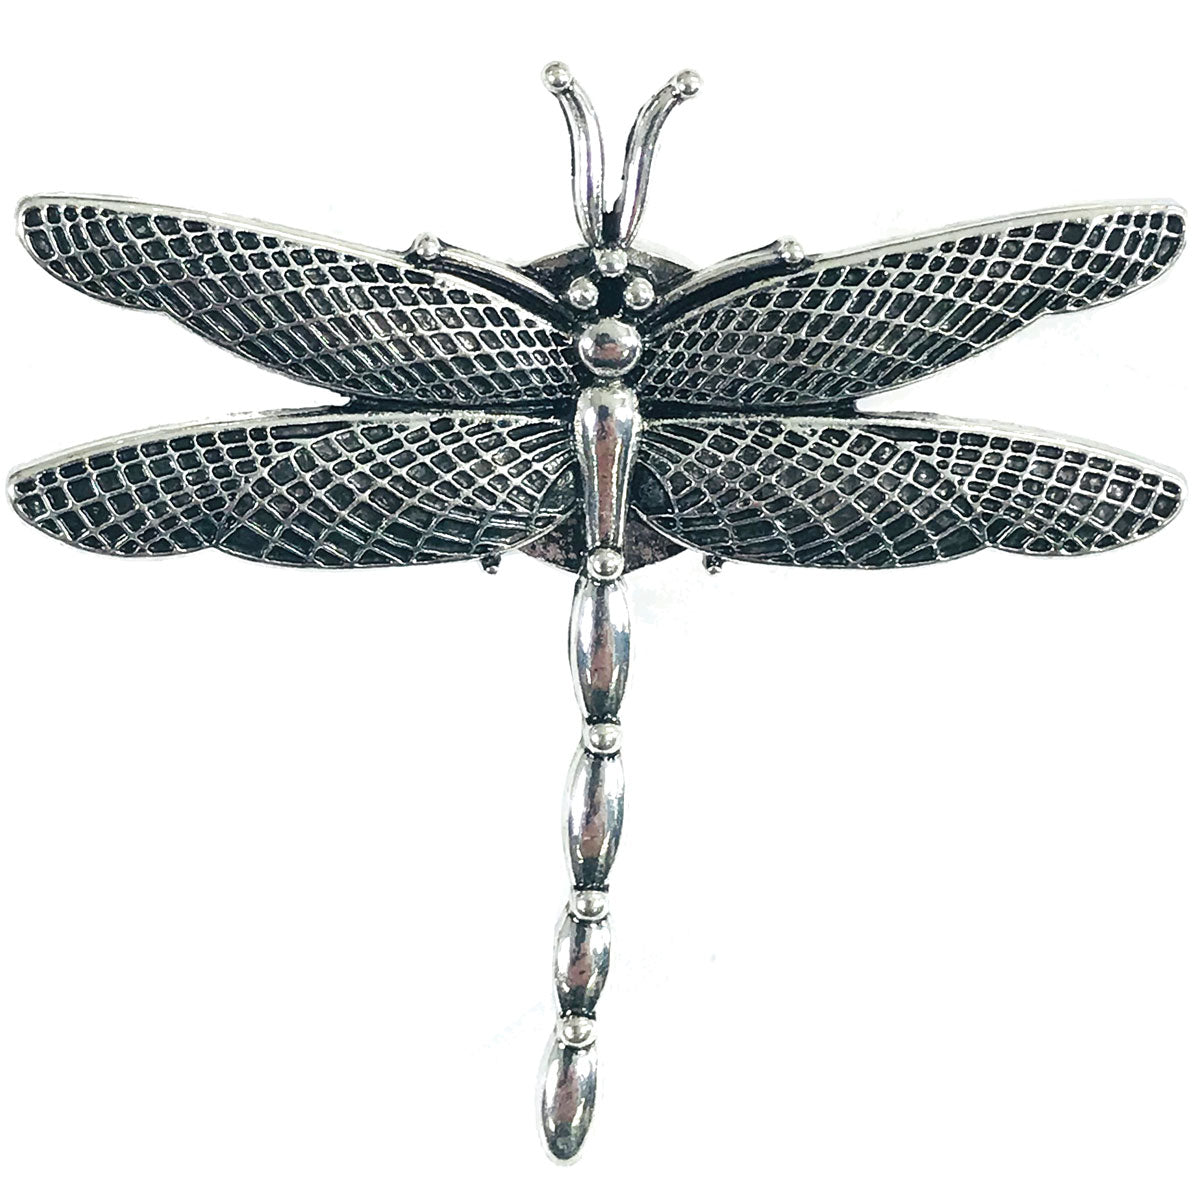 Silver Dragonfly seen as seen from above. Magnetic Brooch for Scarves Artistic Sculptural shapes add a personality to absolutely anything you wish to put your stamp on! The Super Strong Magnet is enough for a jacket lapel! Use to hold a sarong or cardigan together.  Great to adorn a hat or to hold a scarf in place with Fabric Safe Magnet.